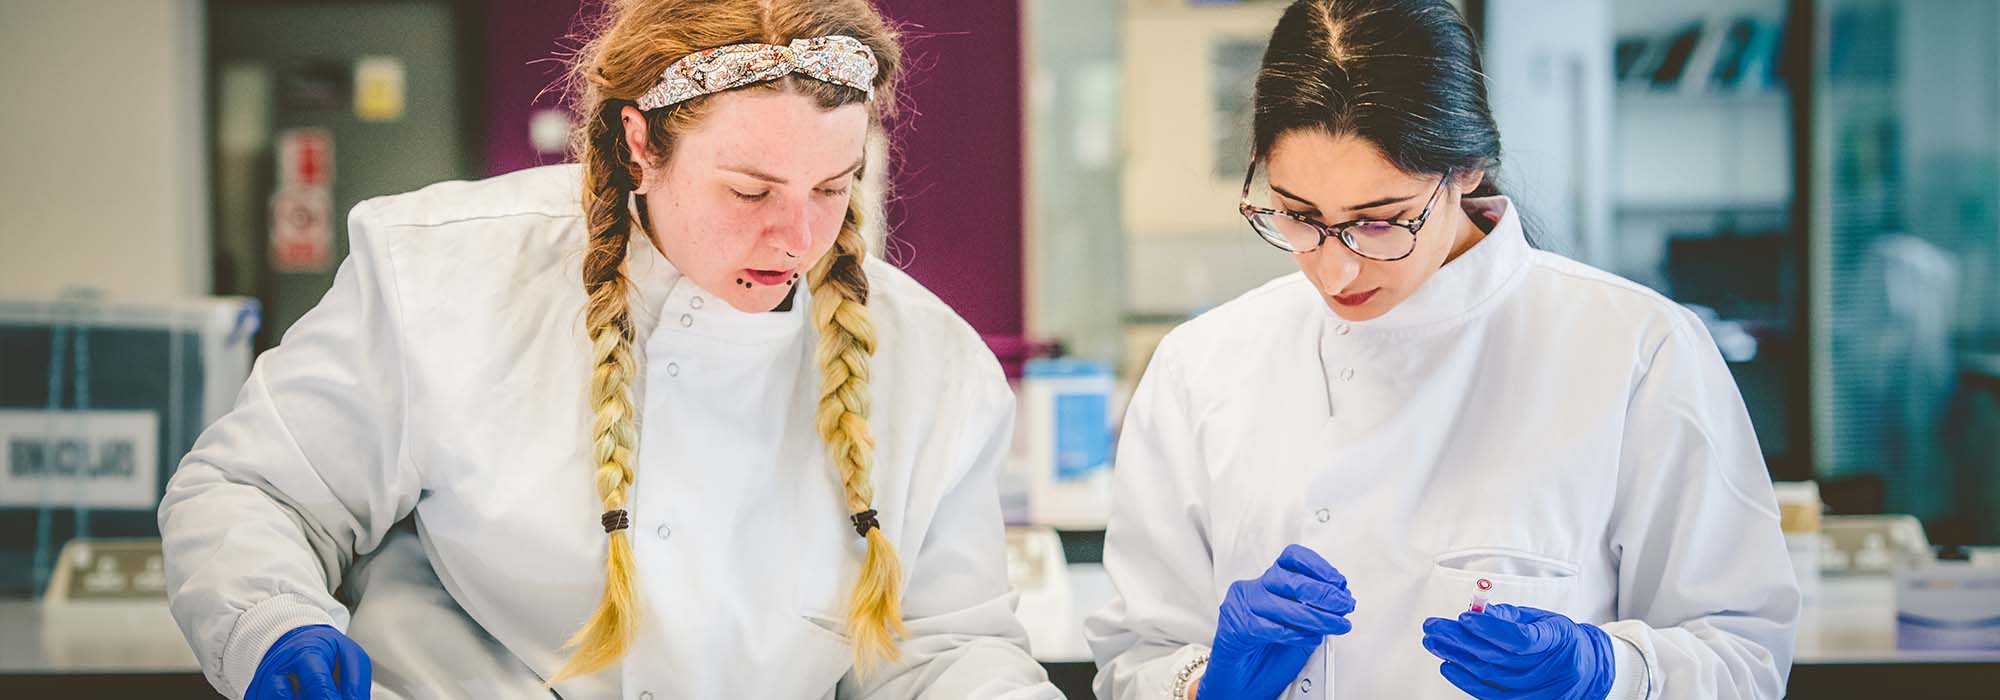 two female students working in the lab, they are wearing white lab coats and surgical gloves.